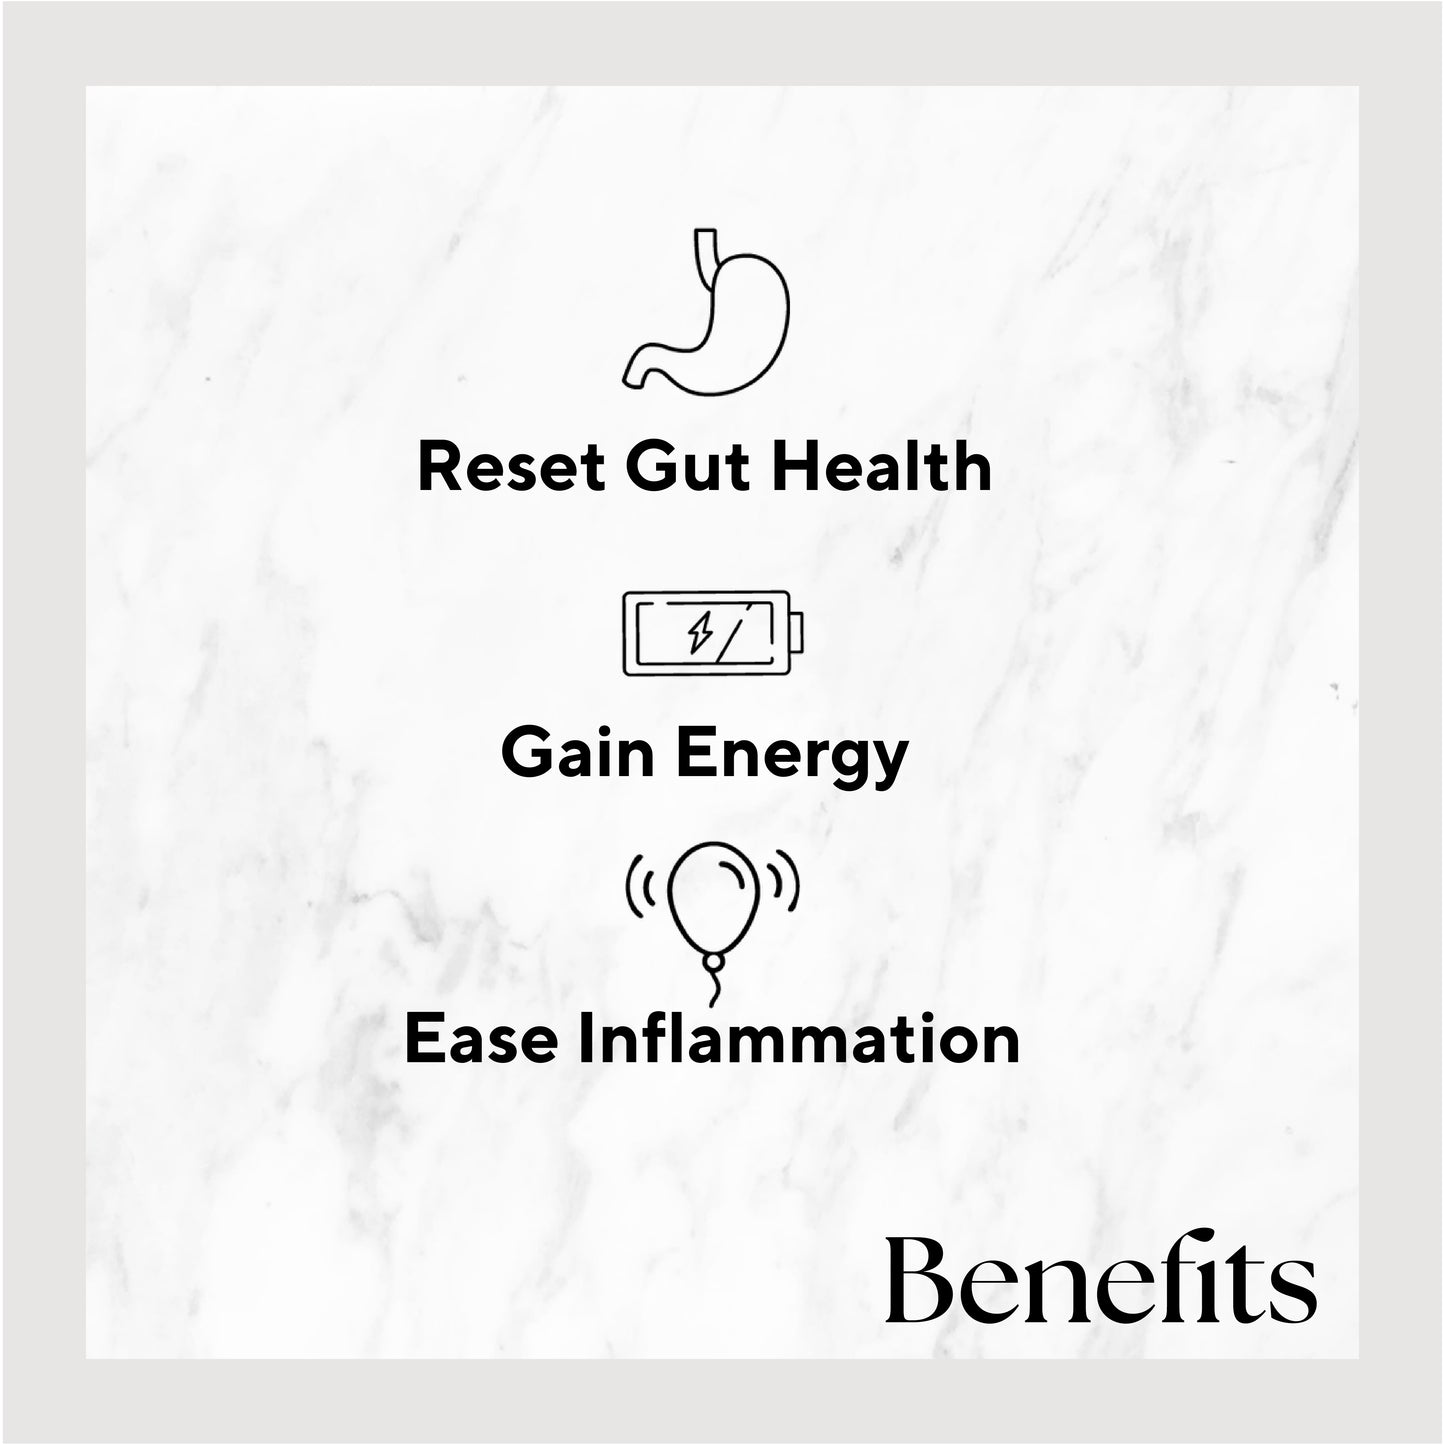 Infographic listing benefits of the product. Benefits include: Reset Gut Health, Gain Energy, and Ease Inflammation.